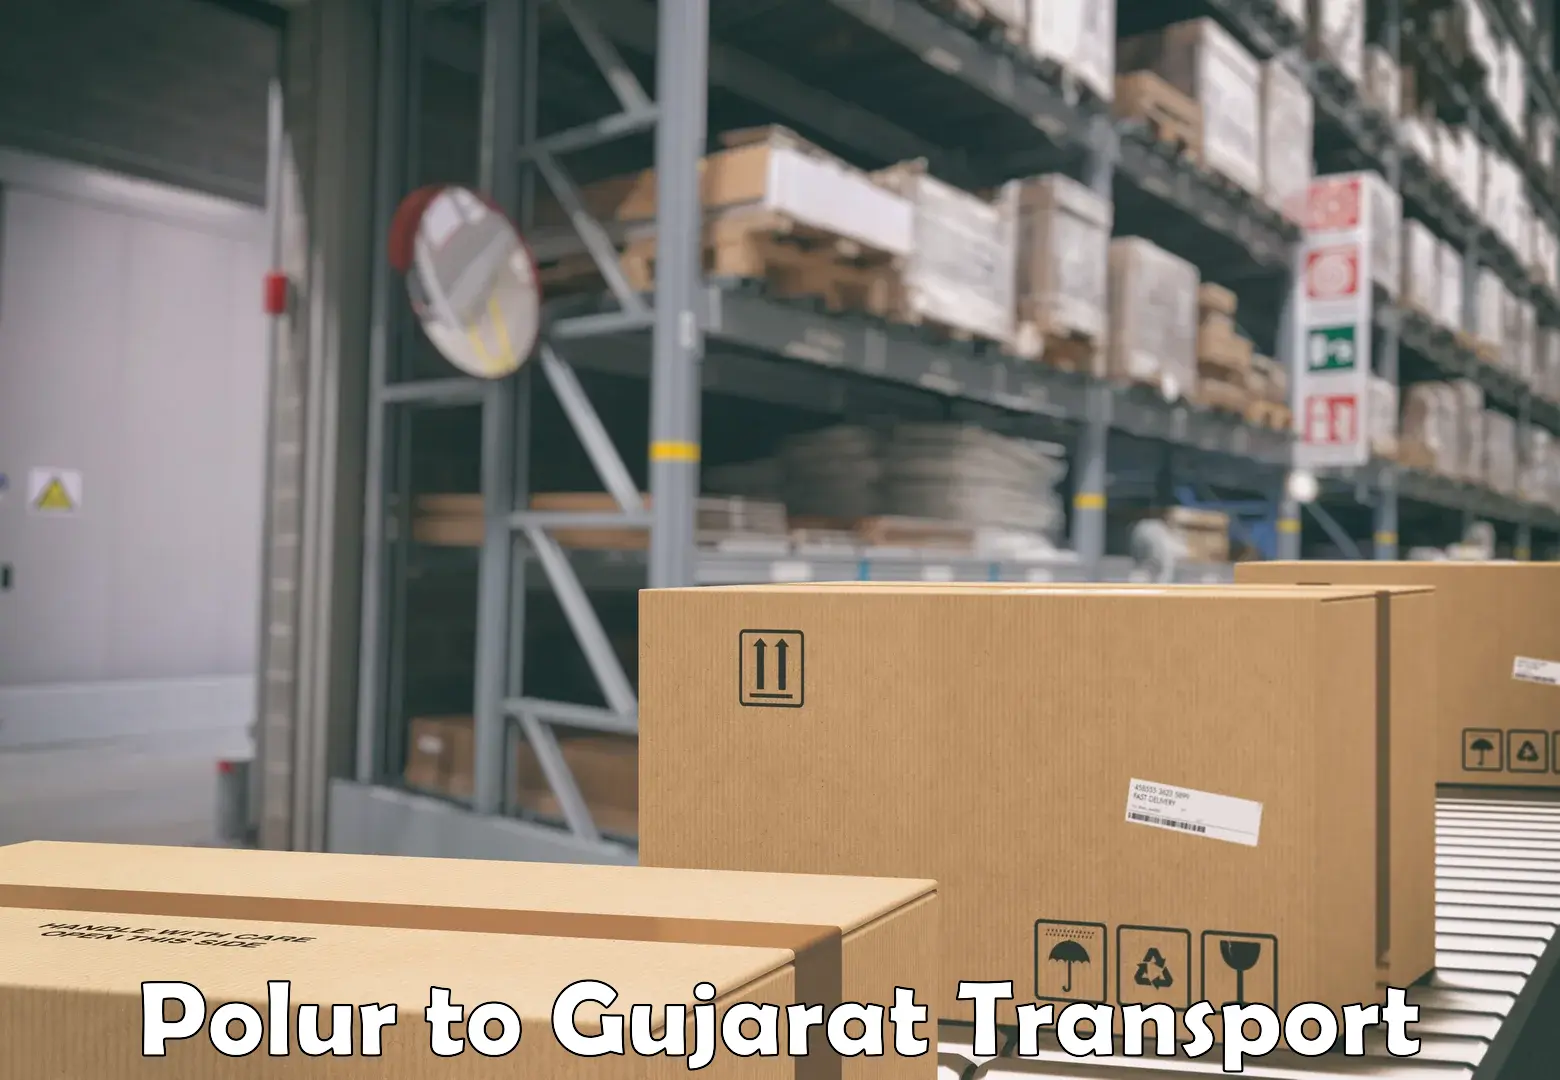 Goods delivery service Polur to Gujarat